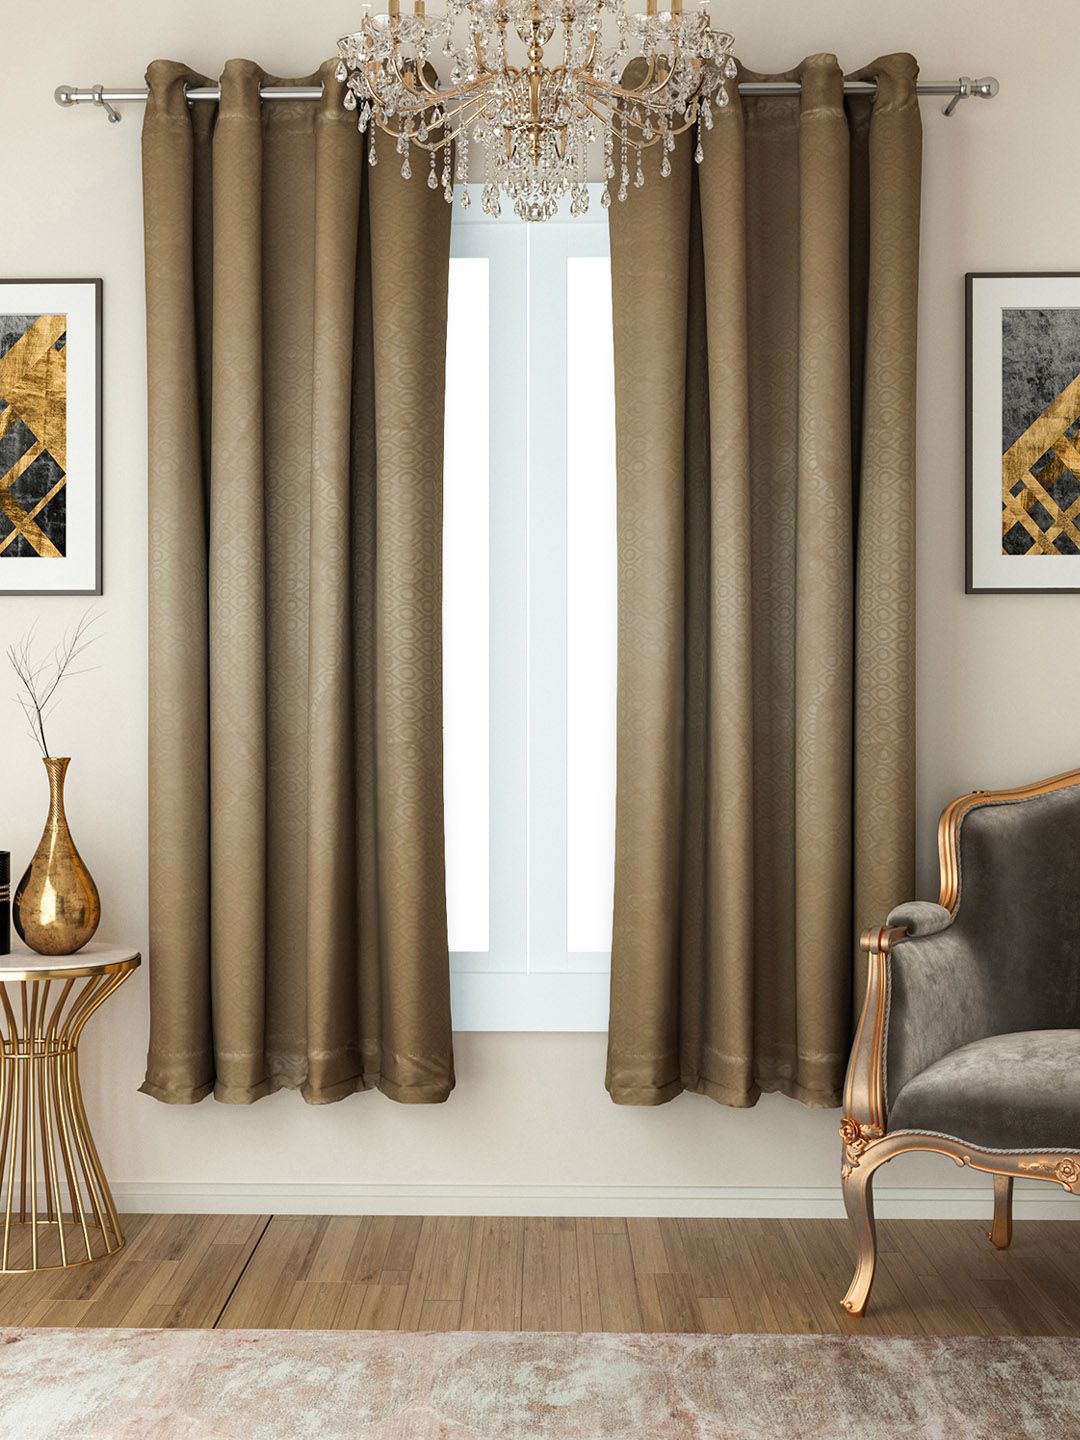 SWAYAM Khaki Set of 2 Black Out Window Curtains Price in India